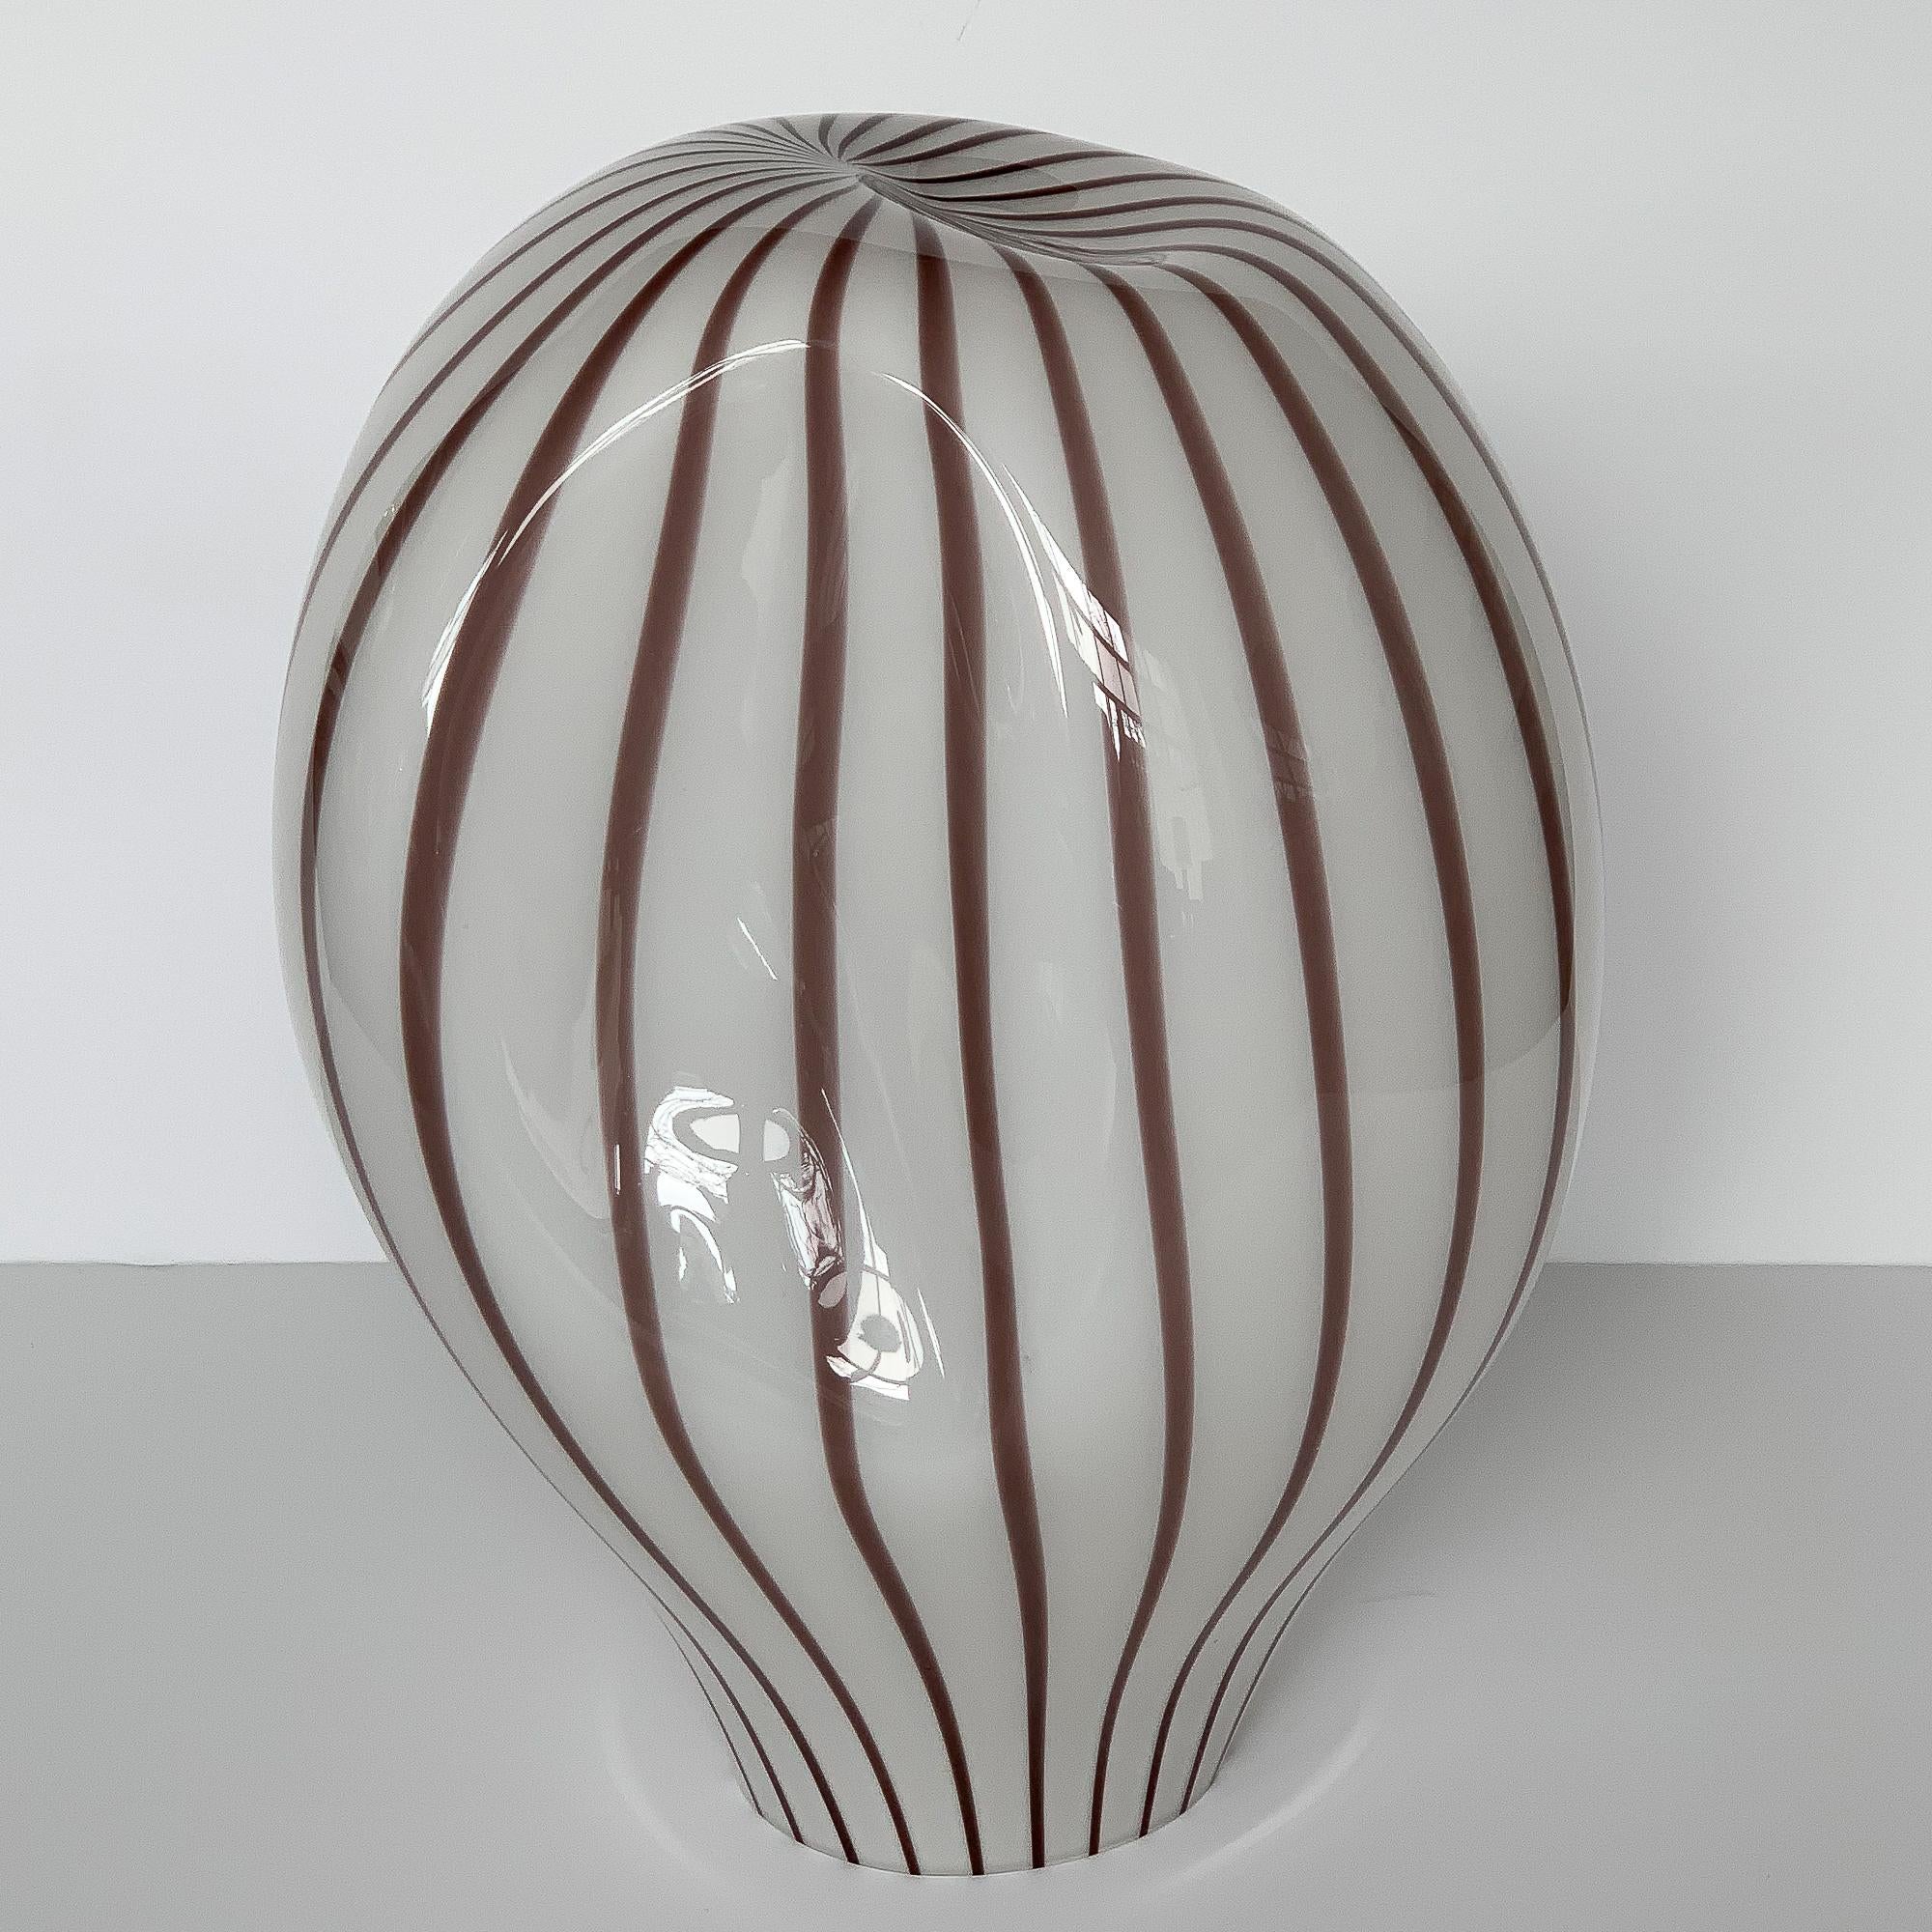 Lino Tagliapietra large balloon shaped Murano glass table lamp for Effetre, circa 1970s. Off-white glass with swirled stripe in a pale muted purple color. Takes one standard base light bulb. In-line on/off switch on cord.